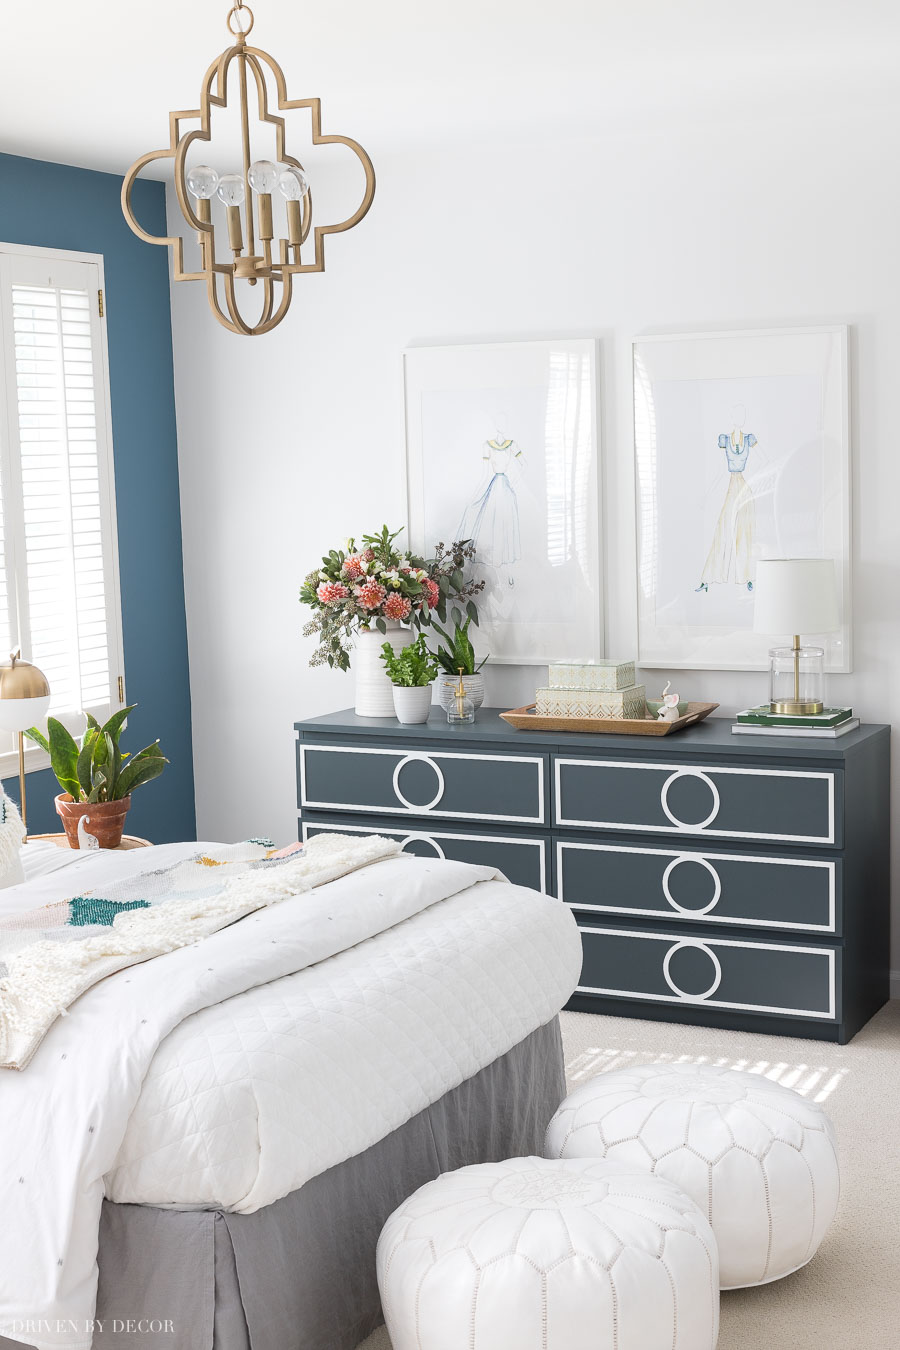 A basic IKEA Malm dresser painted and dressed up with overlays to look like a brand new furniture piece!